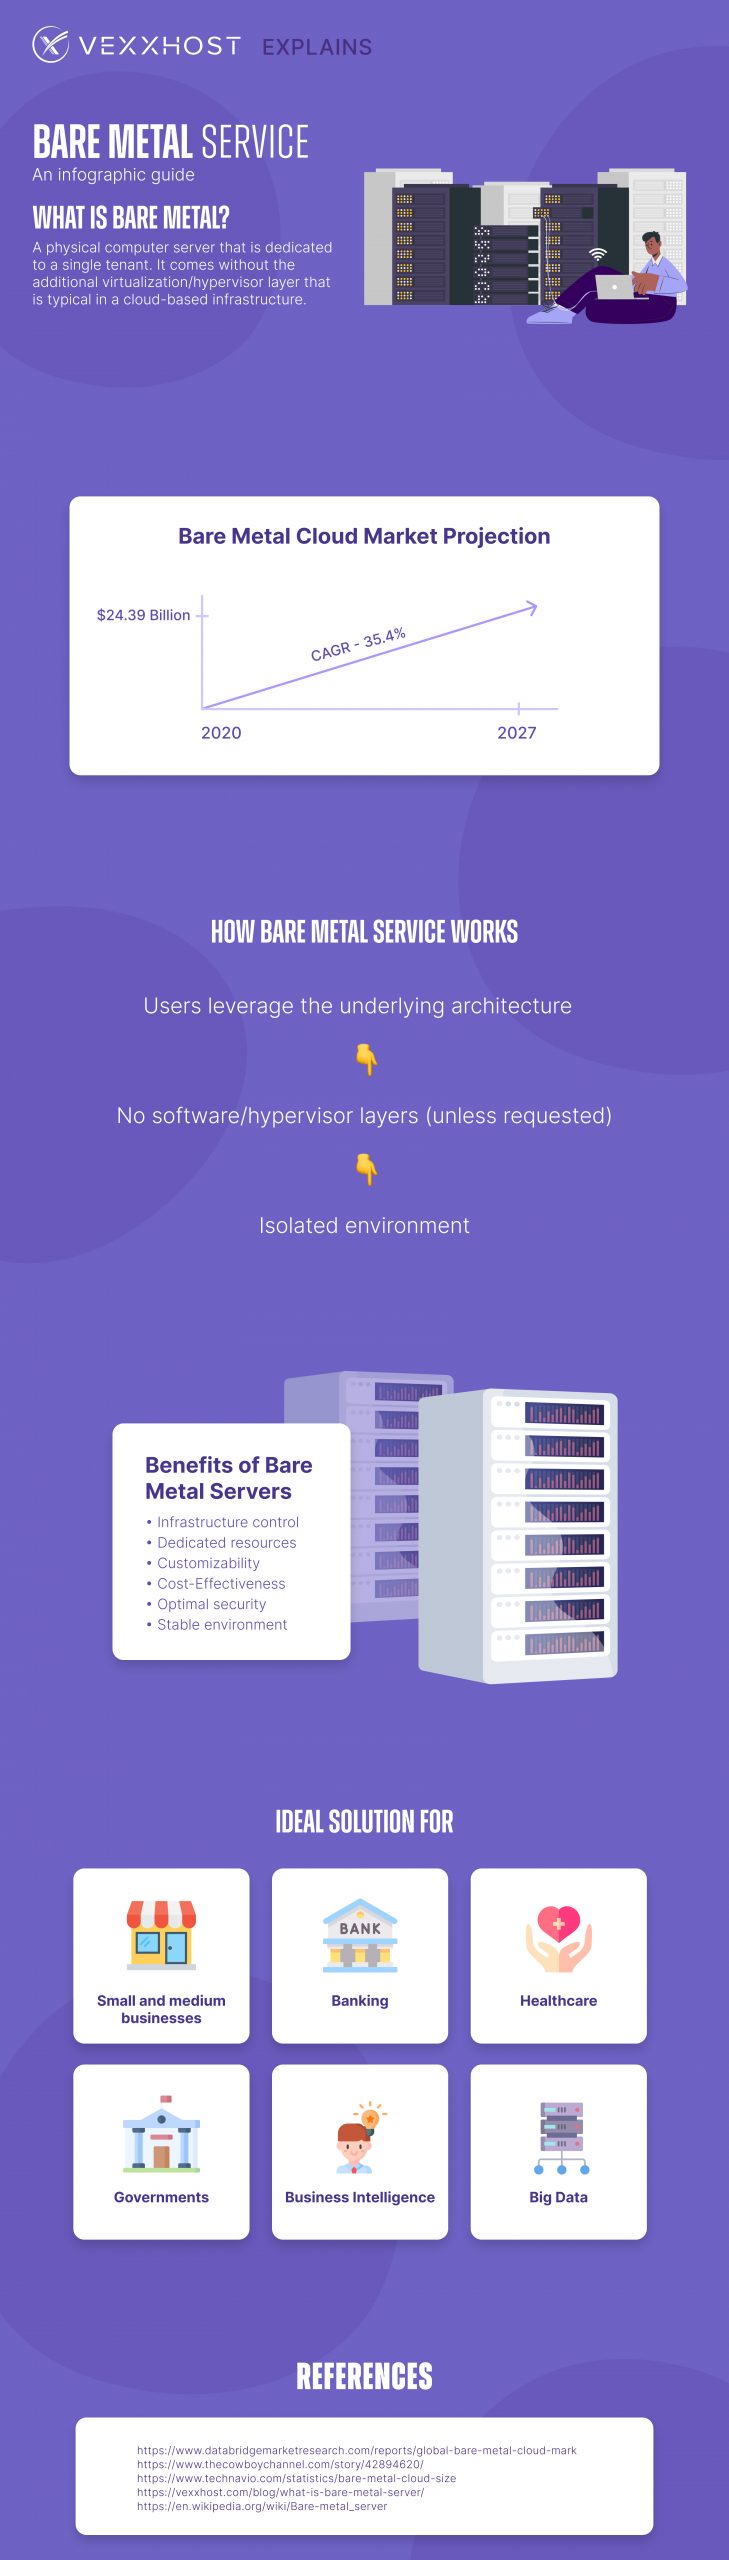 Bare Metal Service - An Infographic Guide